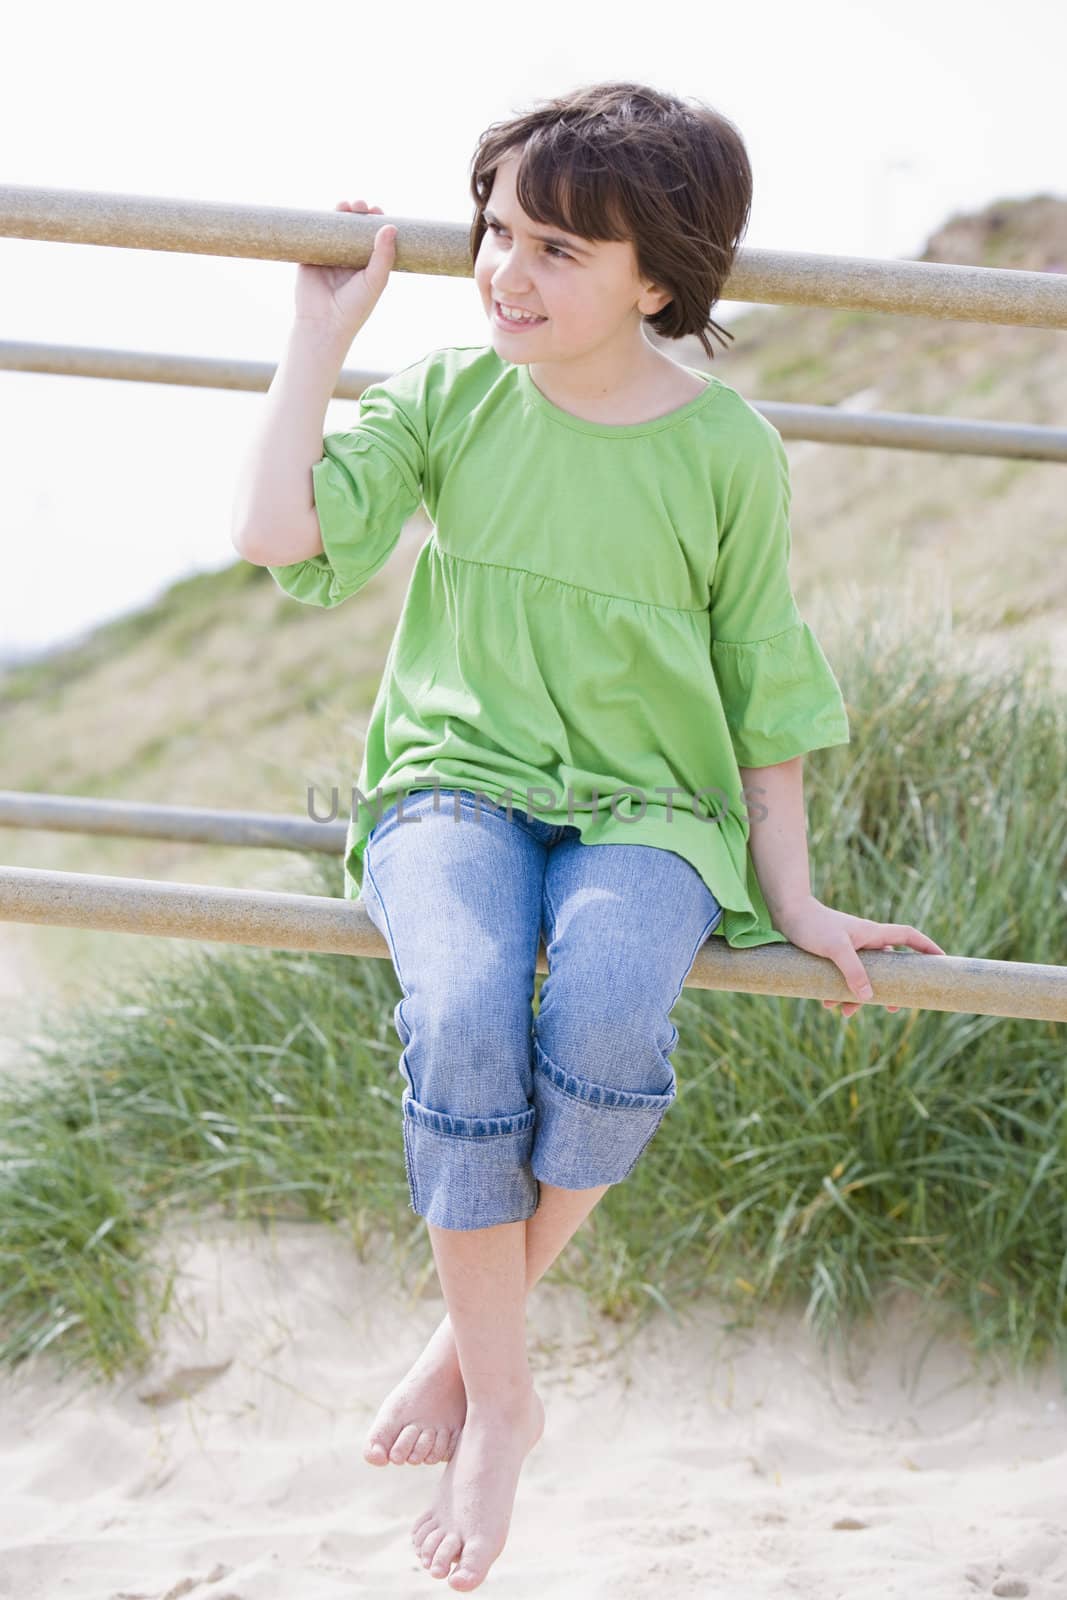 young child sitting on railings by the beach